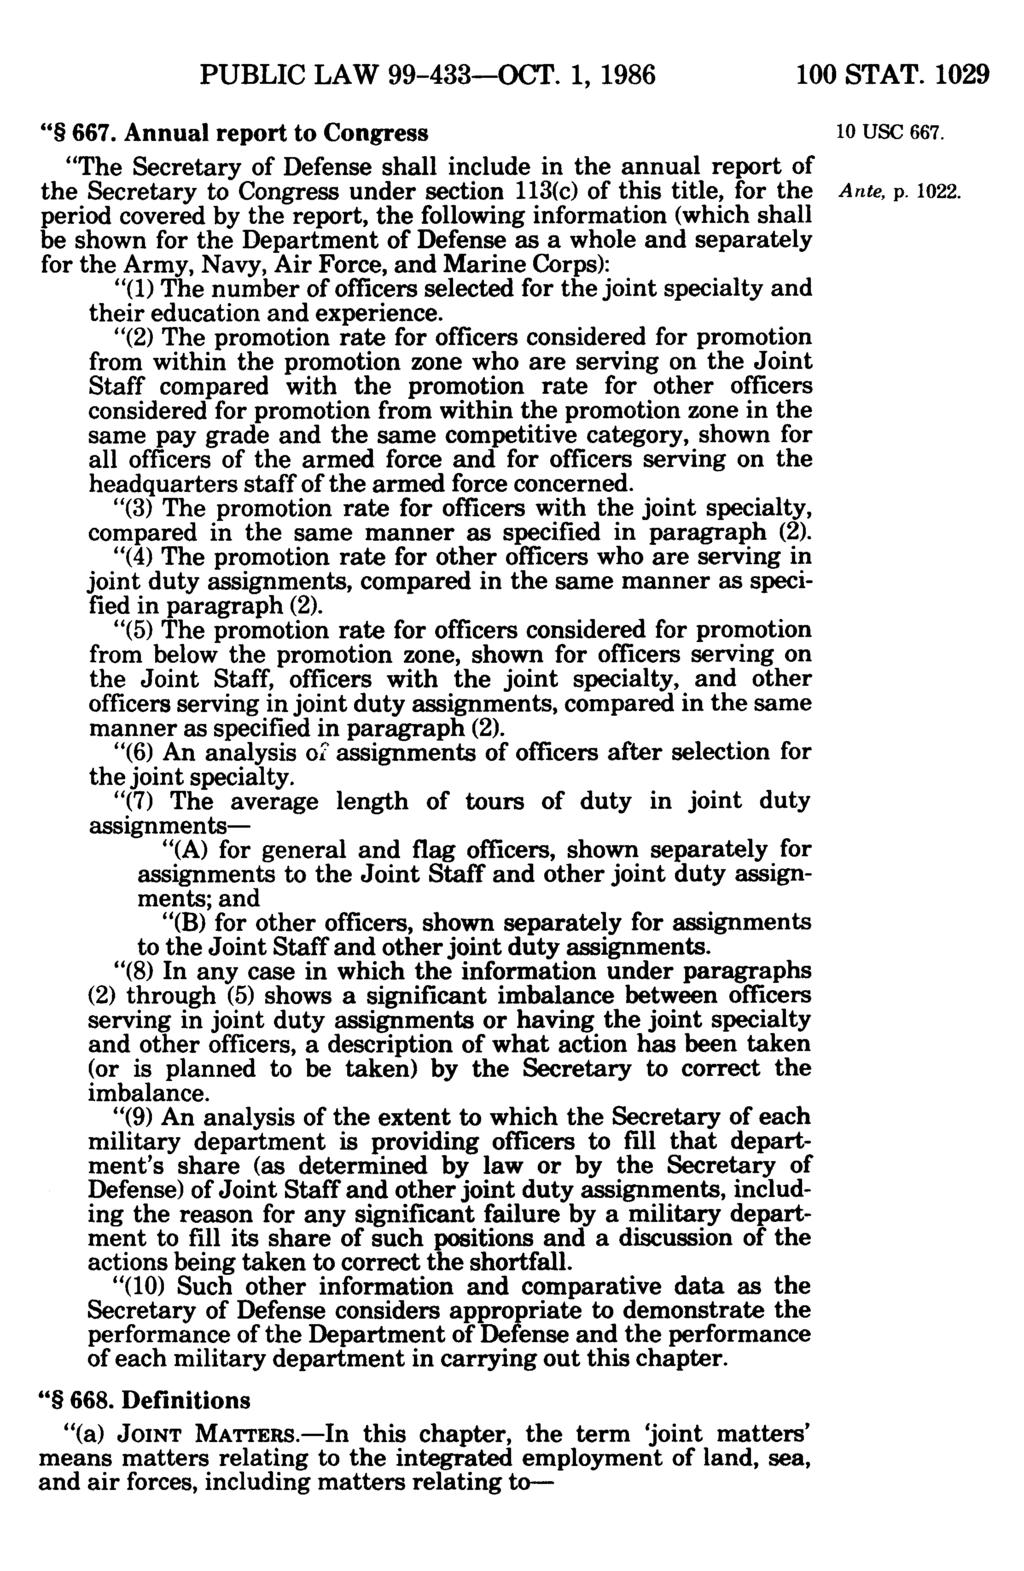 PUBLIC LAW 99-433-OCT. 1986 1, 100 STAT. 1029 667. report Annual to Congress 10 USC 667.